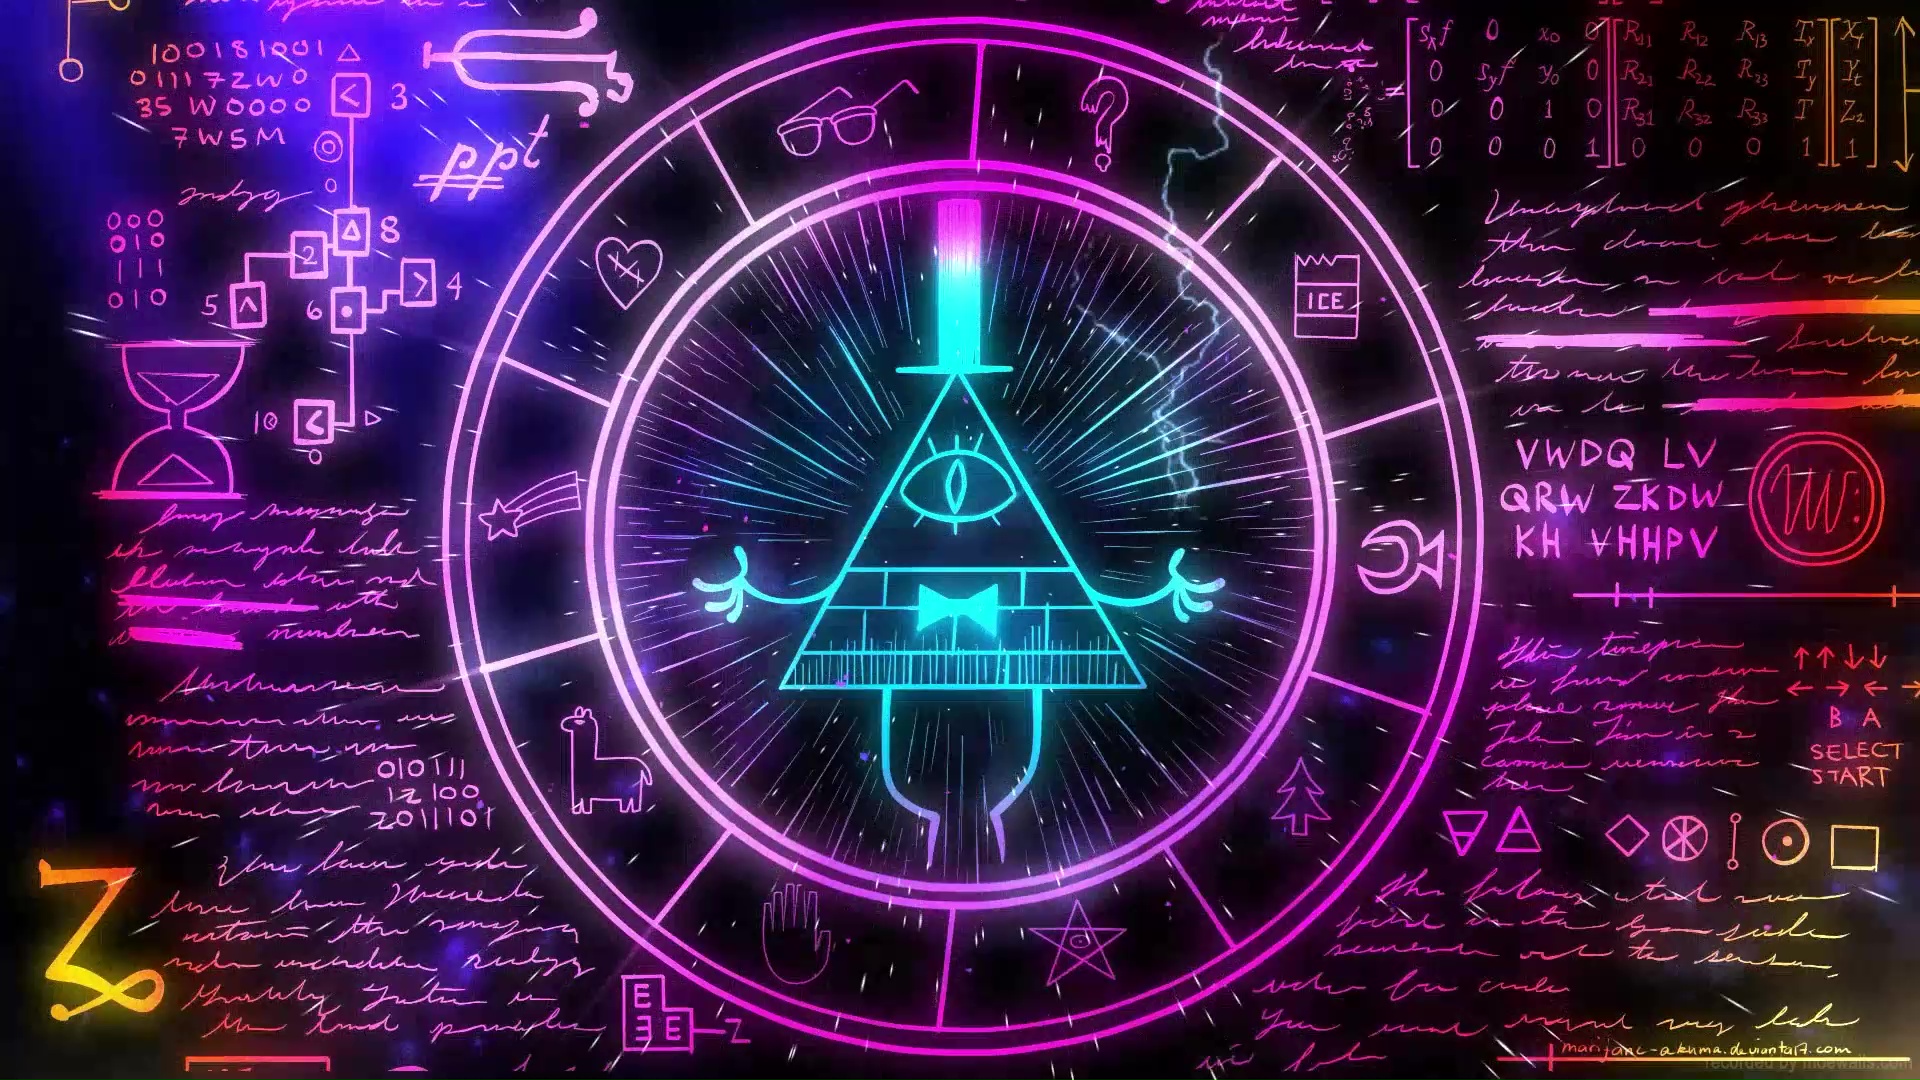 Gravity Falls Wallpapers (80+ images inside)